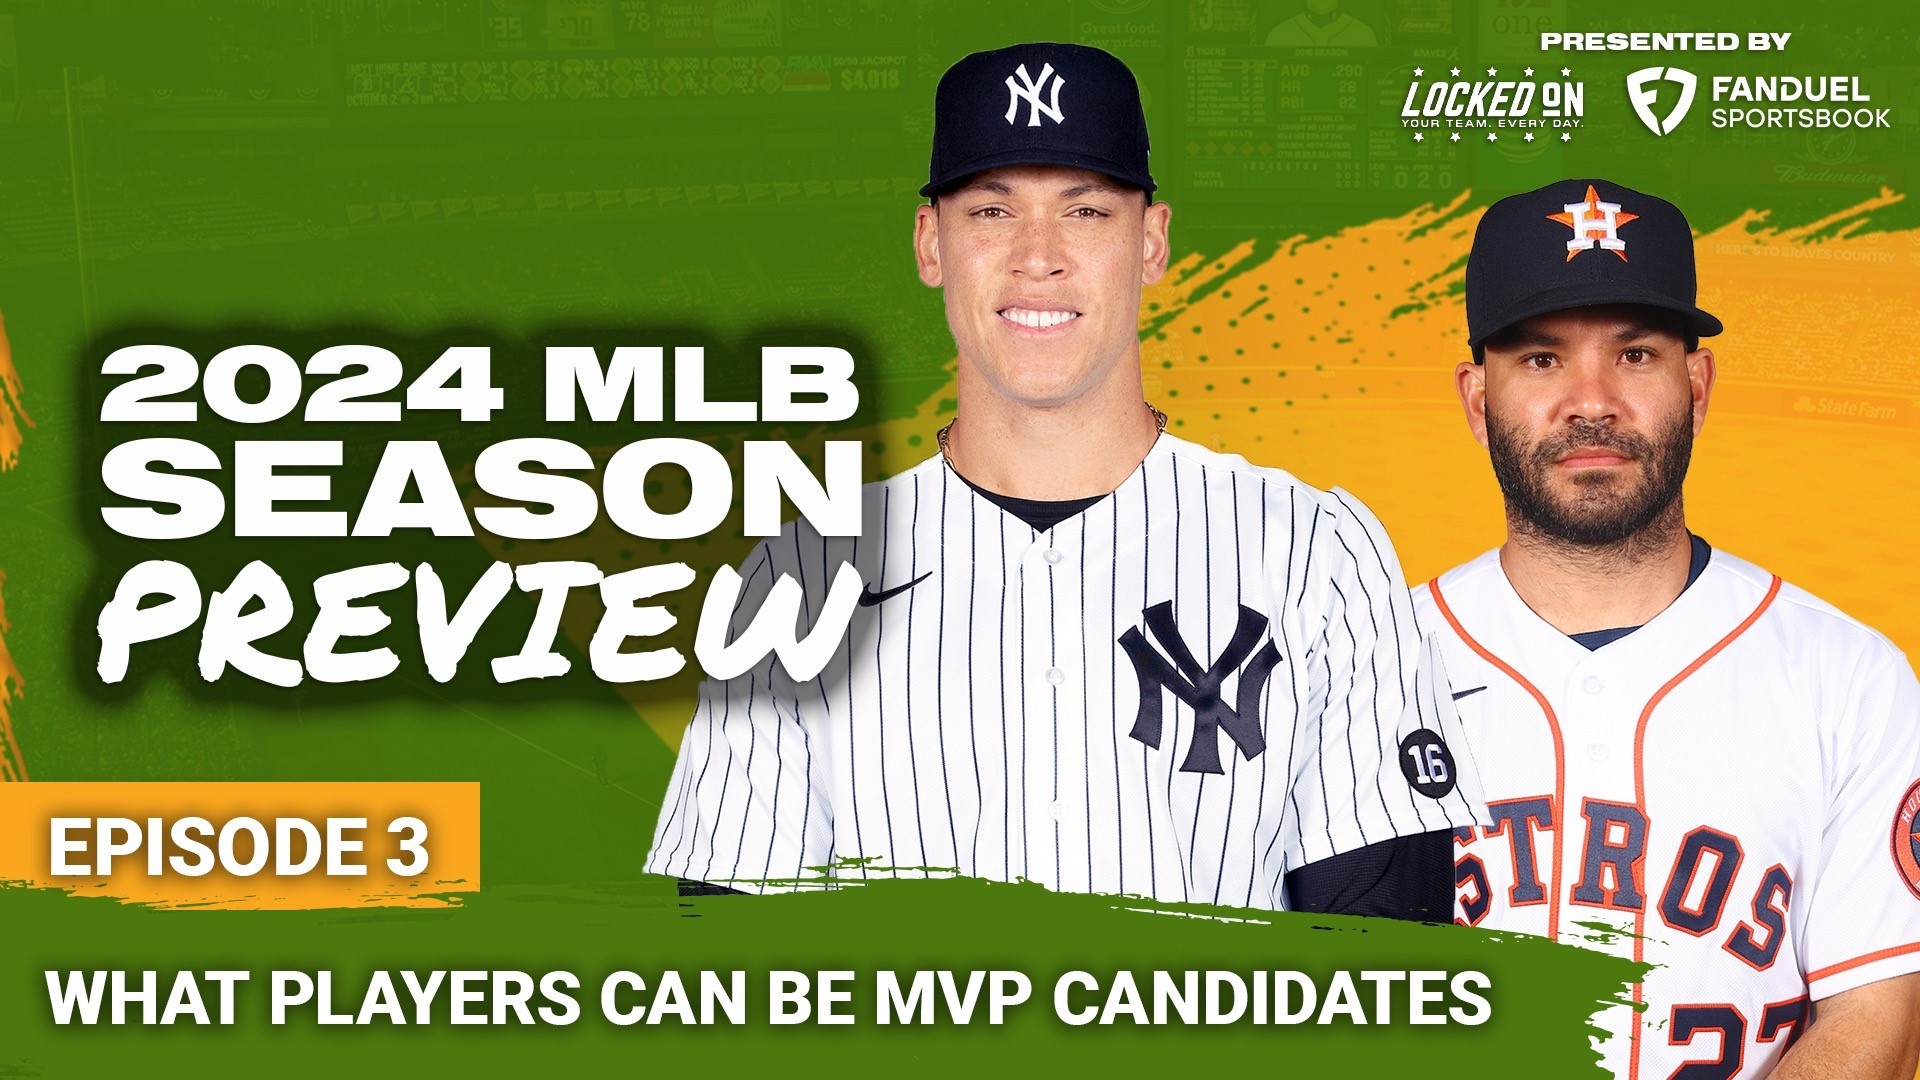 Shohei Ohtani, Juan Soto, Mookie Betts, Freddie Freeman and Aaron Judge might be front-runners for the 2024 MLB MVP, but there are candidates from every division.